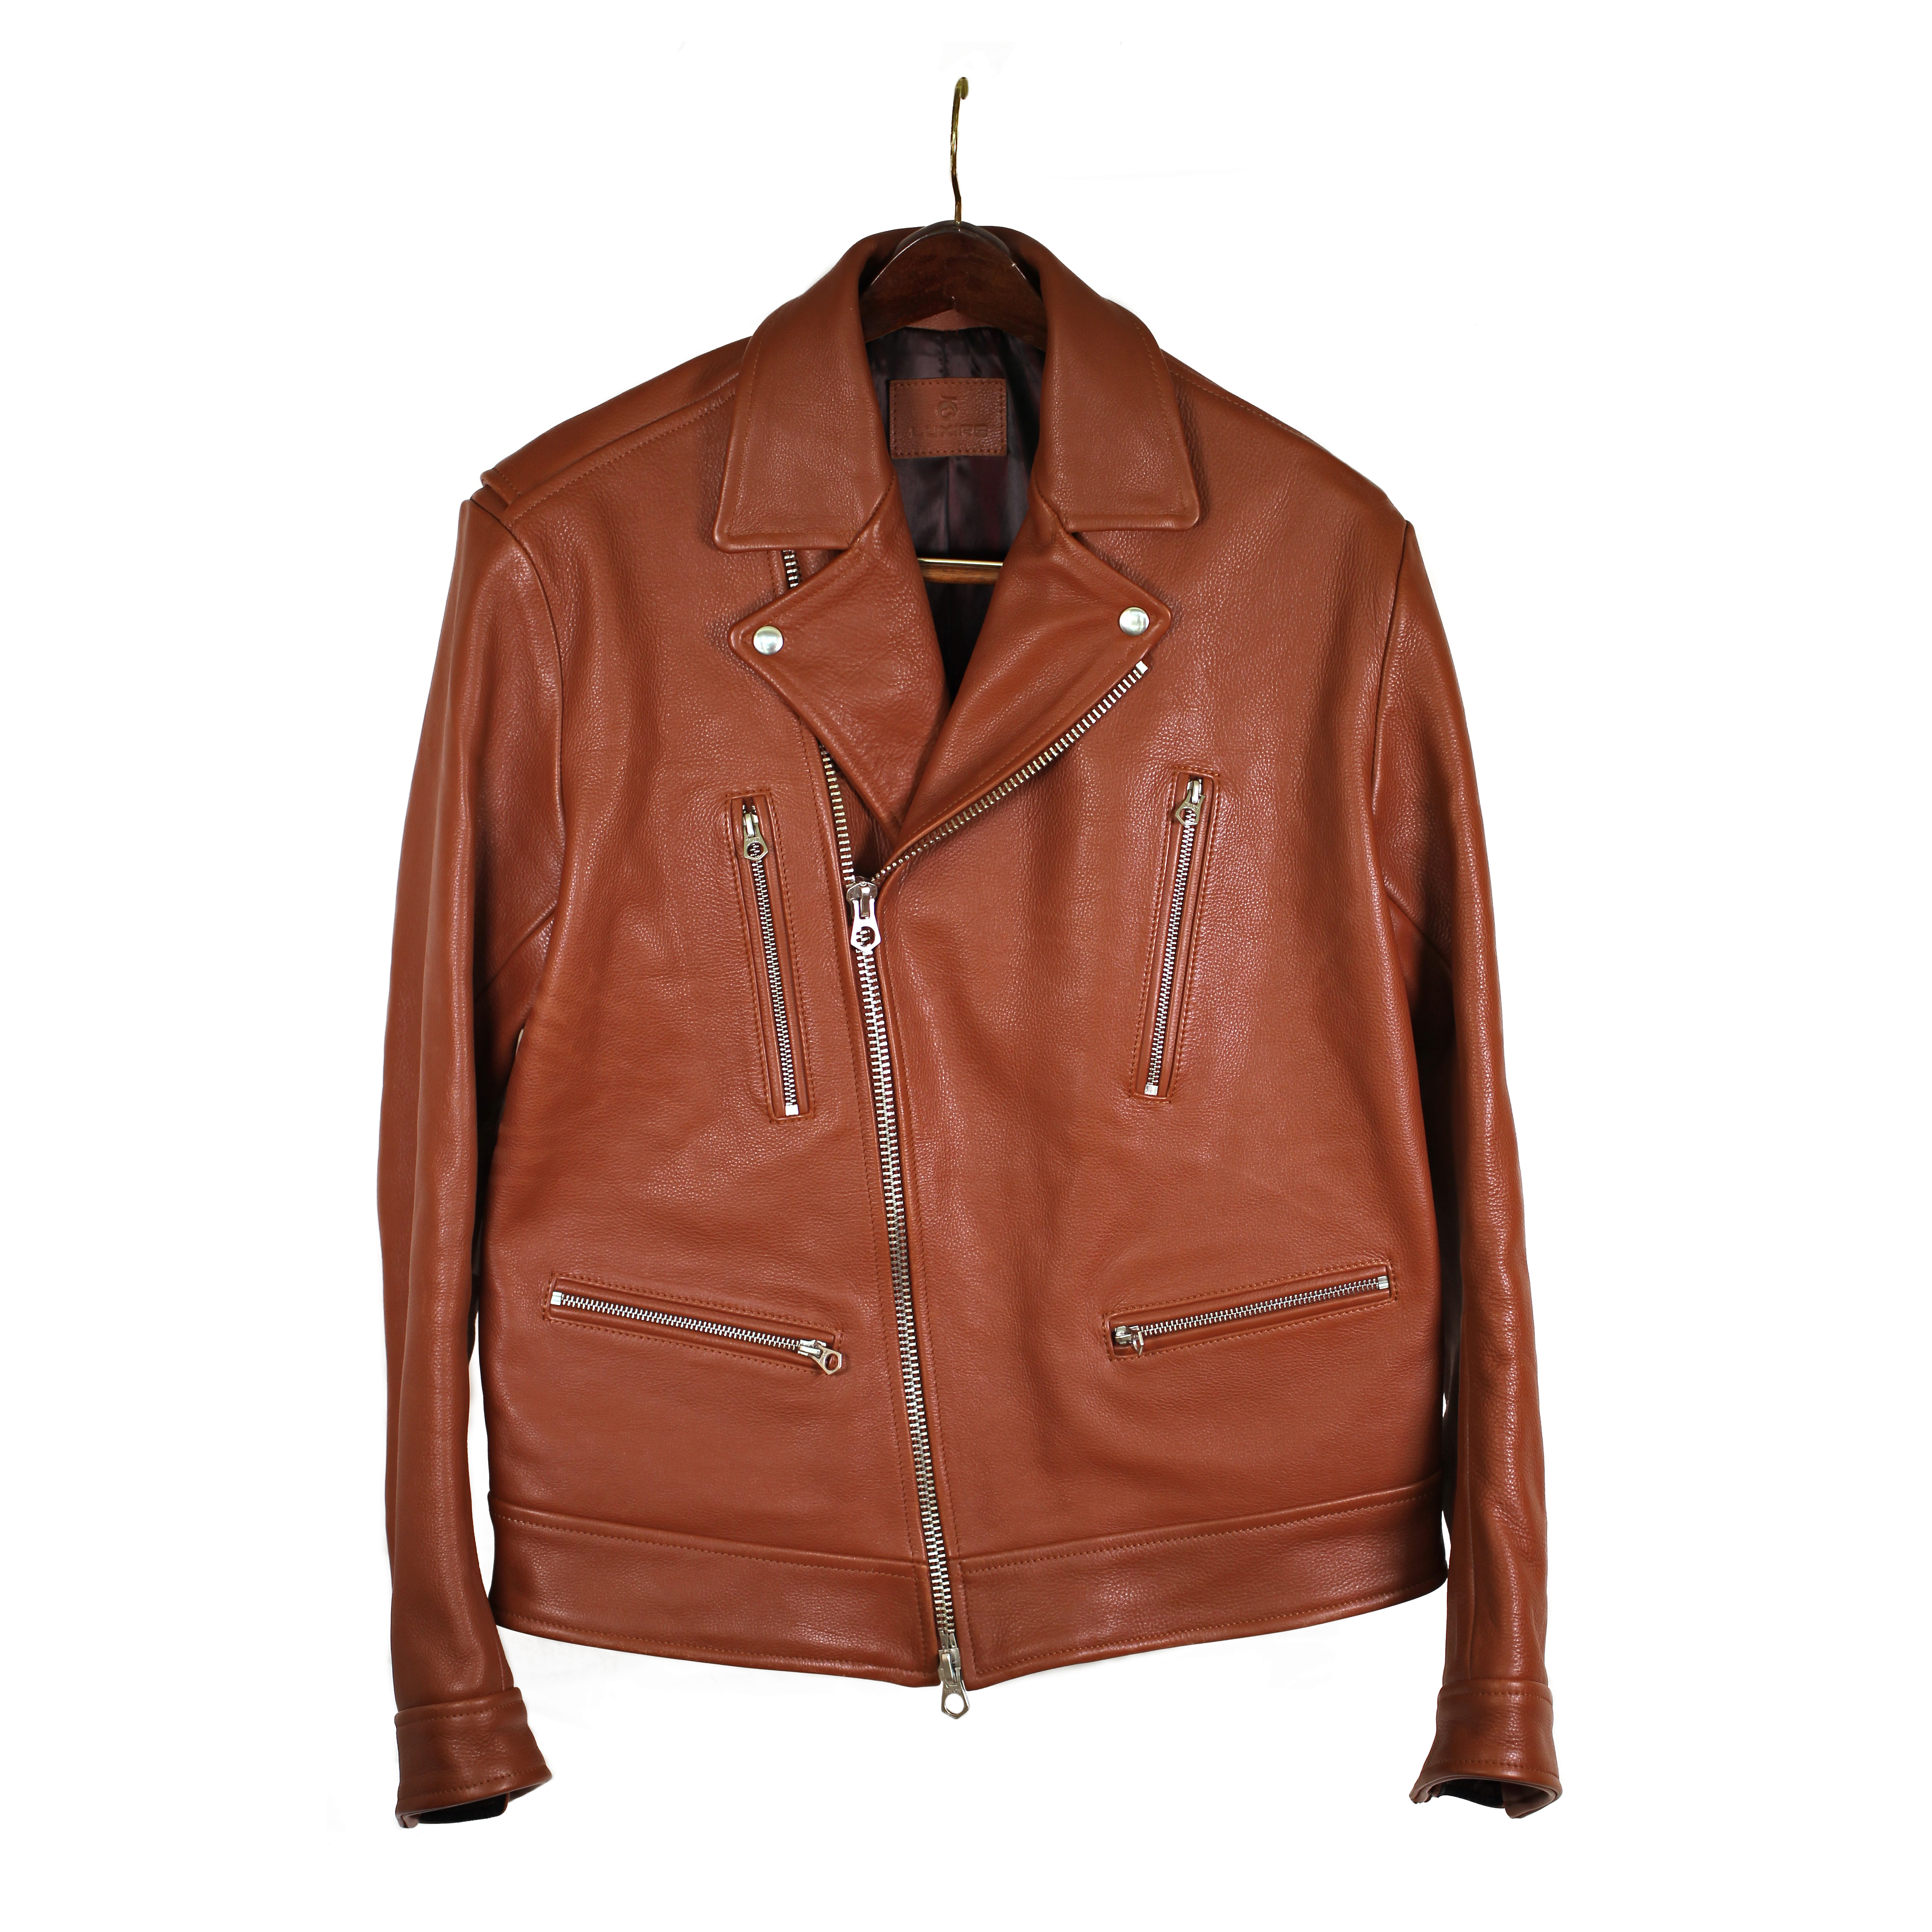 Leather Jackets: Post Pictures of the Best You've Seen/Owned? | Page 1049 |  Styleforum